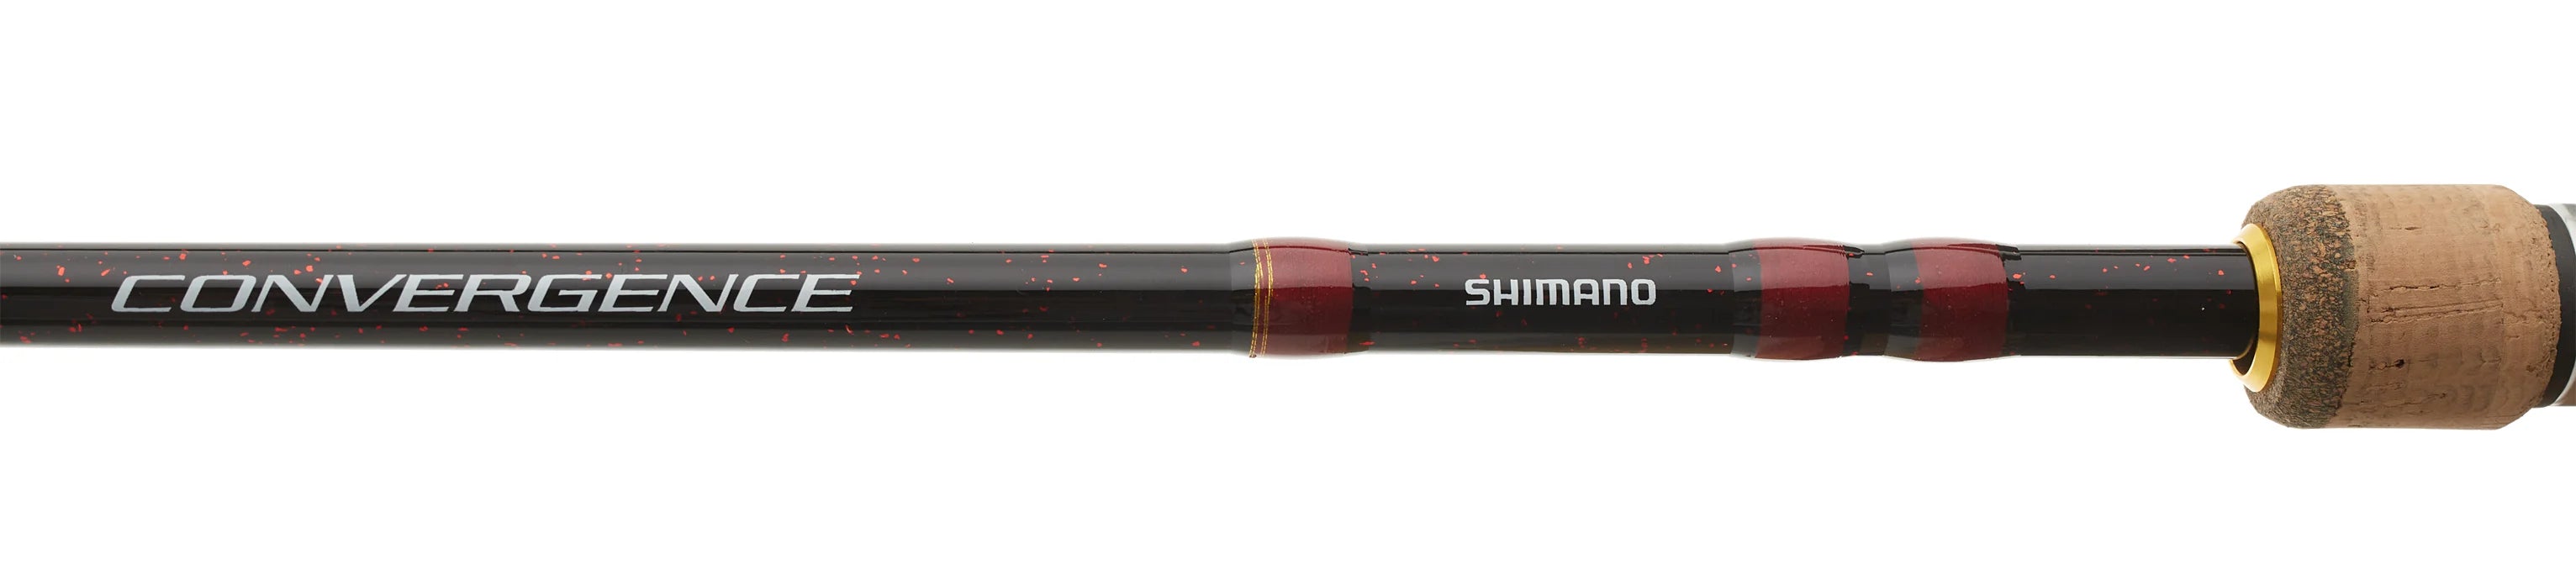 SHIMANO CONVERGENCE D SPINNING RODS - 0